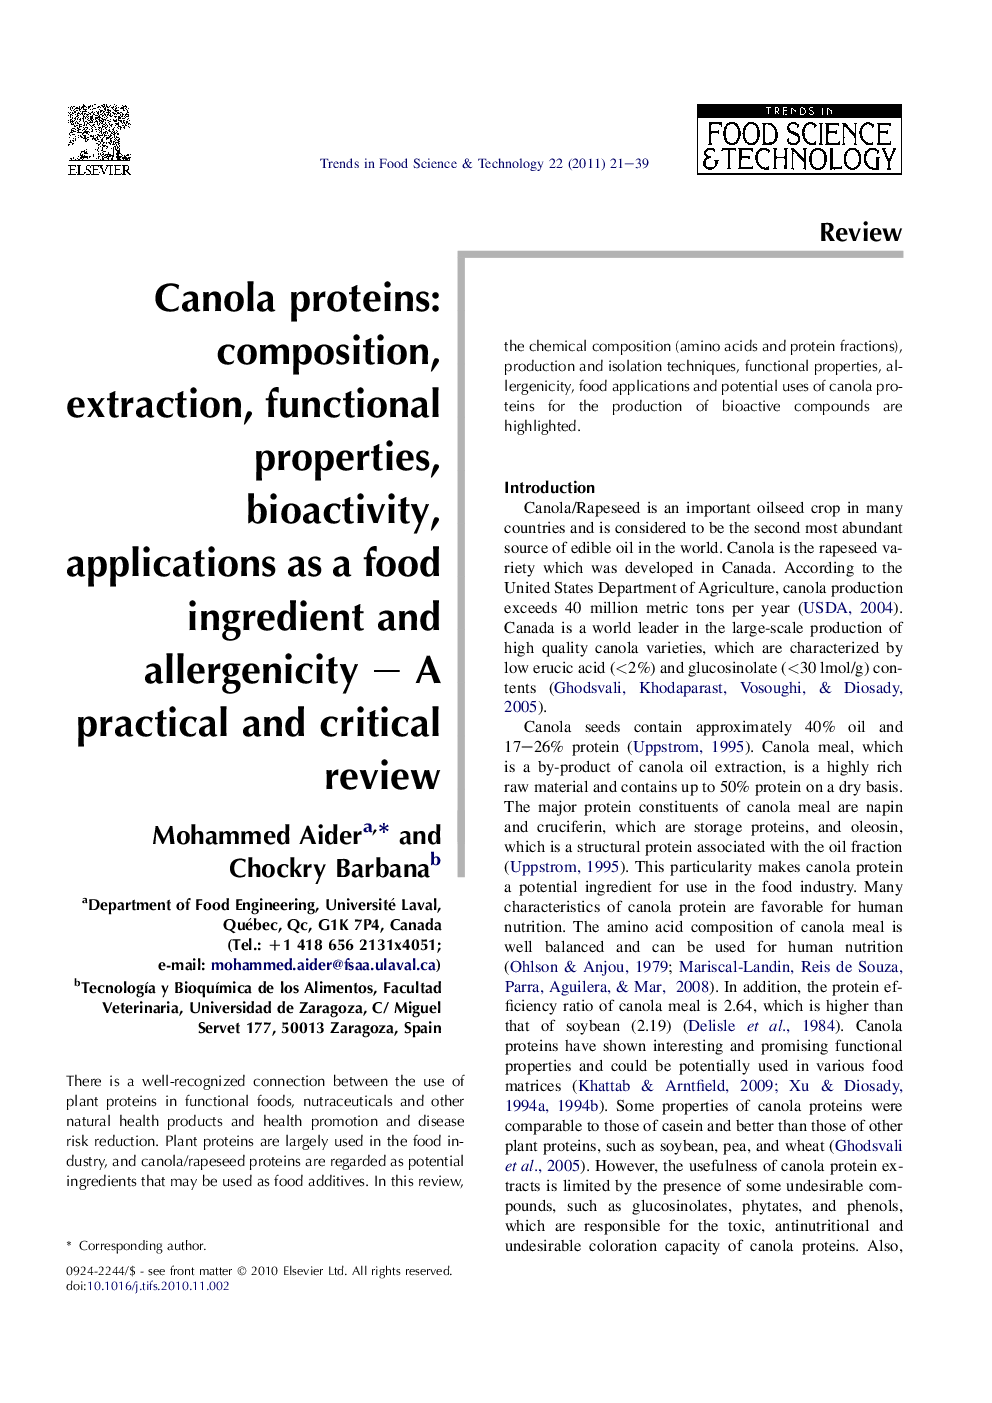 Canola proteins: composition, extraction, functional properties, bioactivity, applications as a food ingredient and allergenicity – A practical and critical review